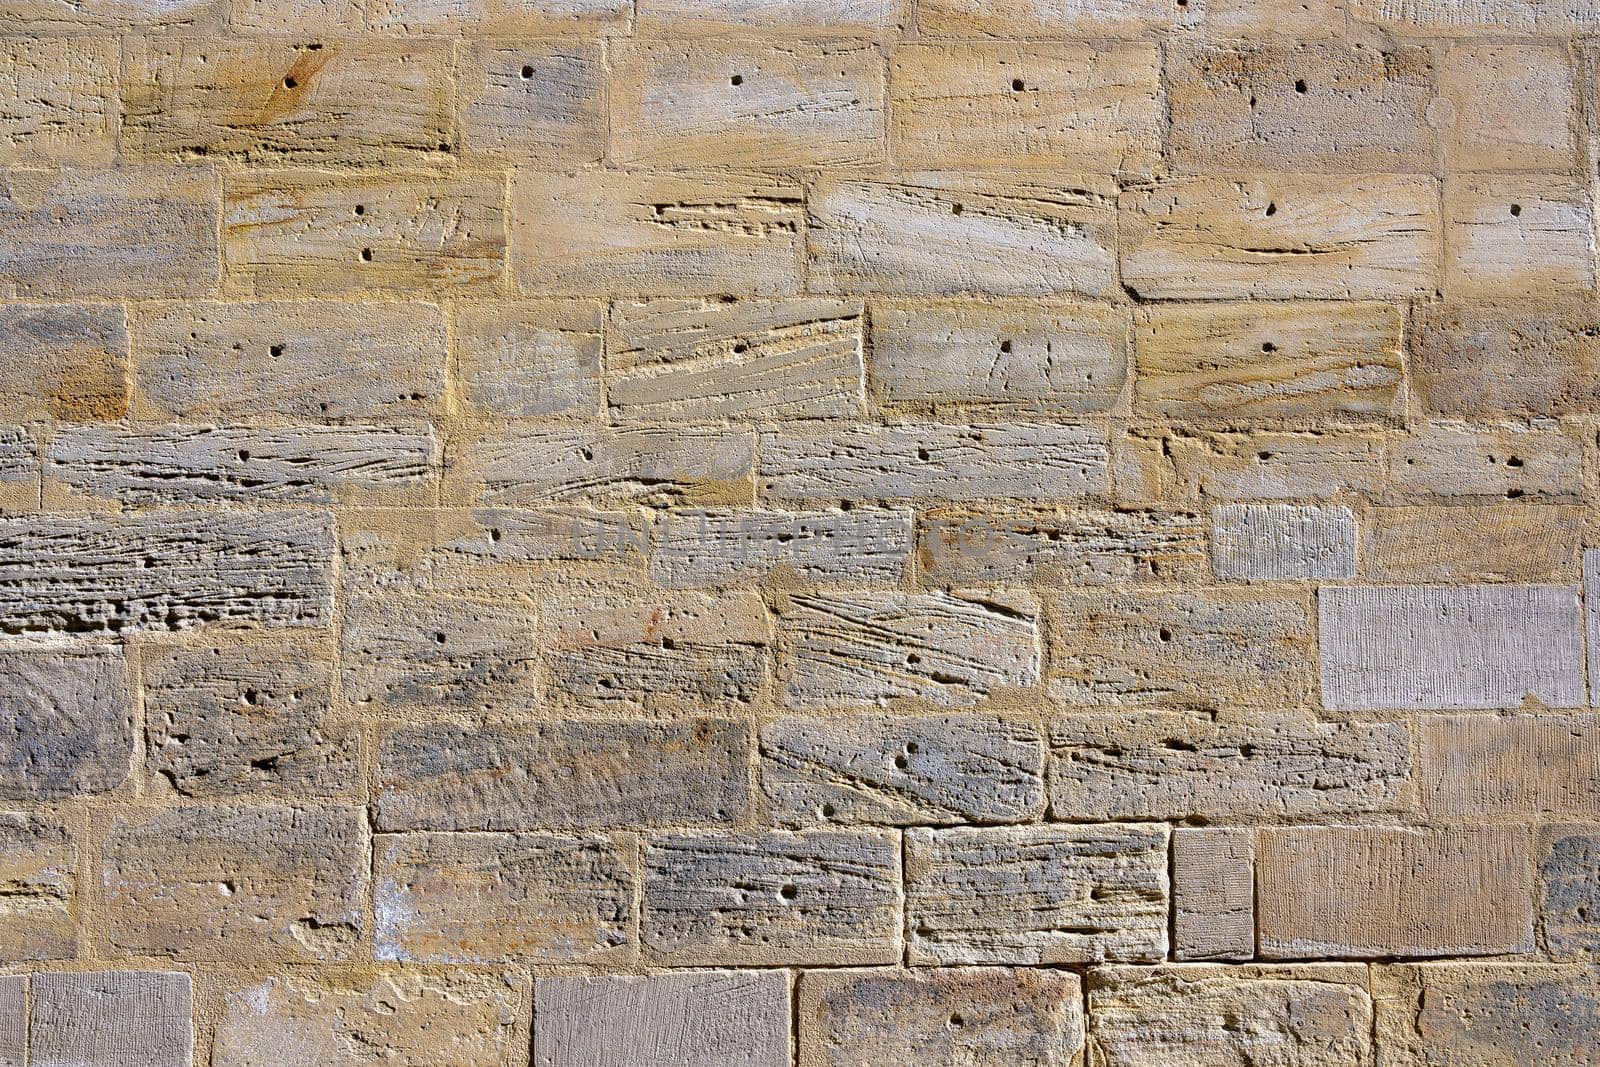 Background from an old wall made of natural stone